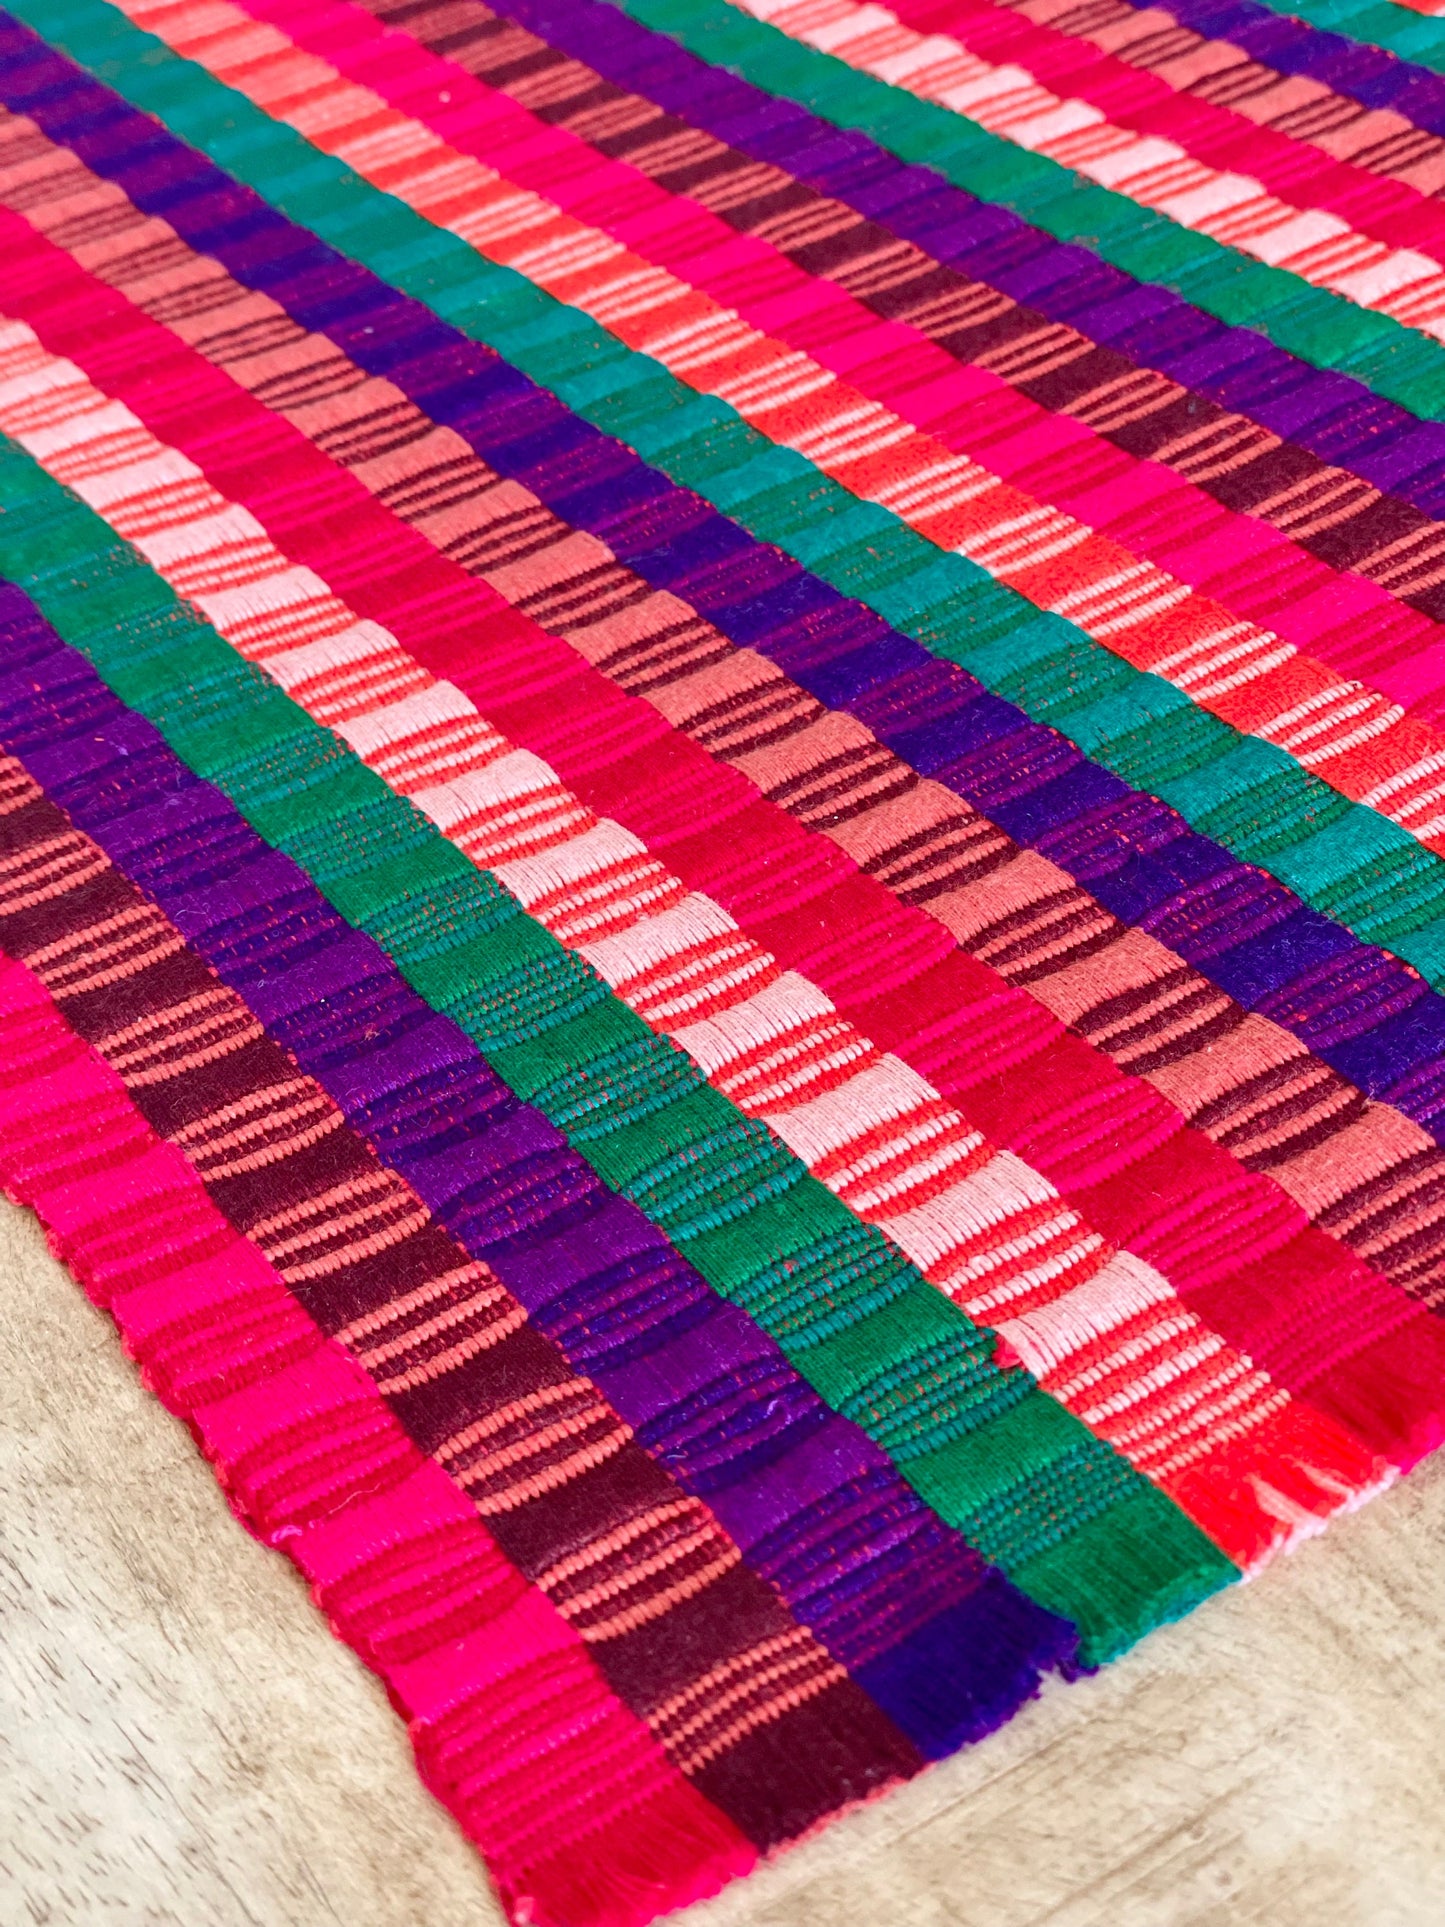 Guatemalan placemats in Pinkmulticolor